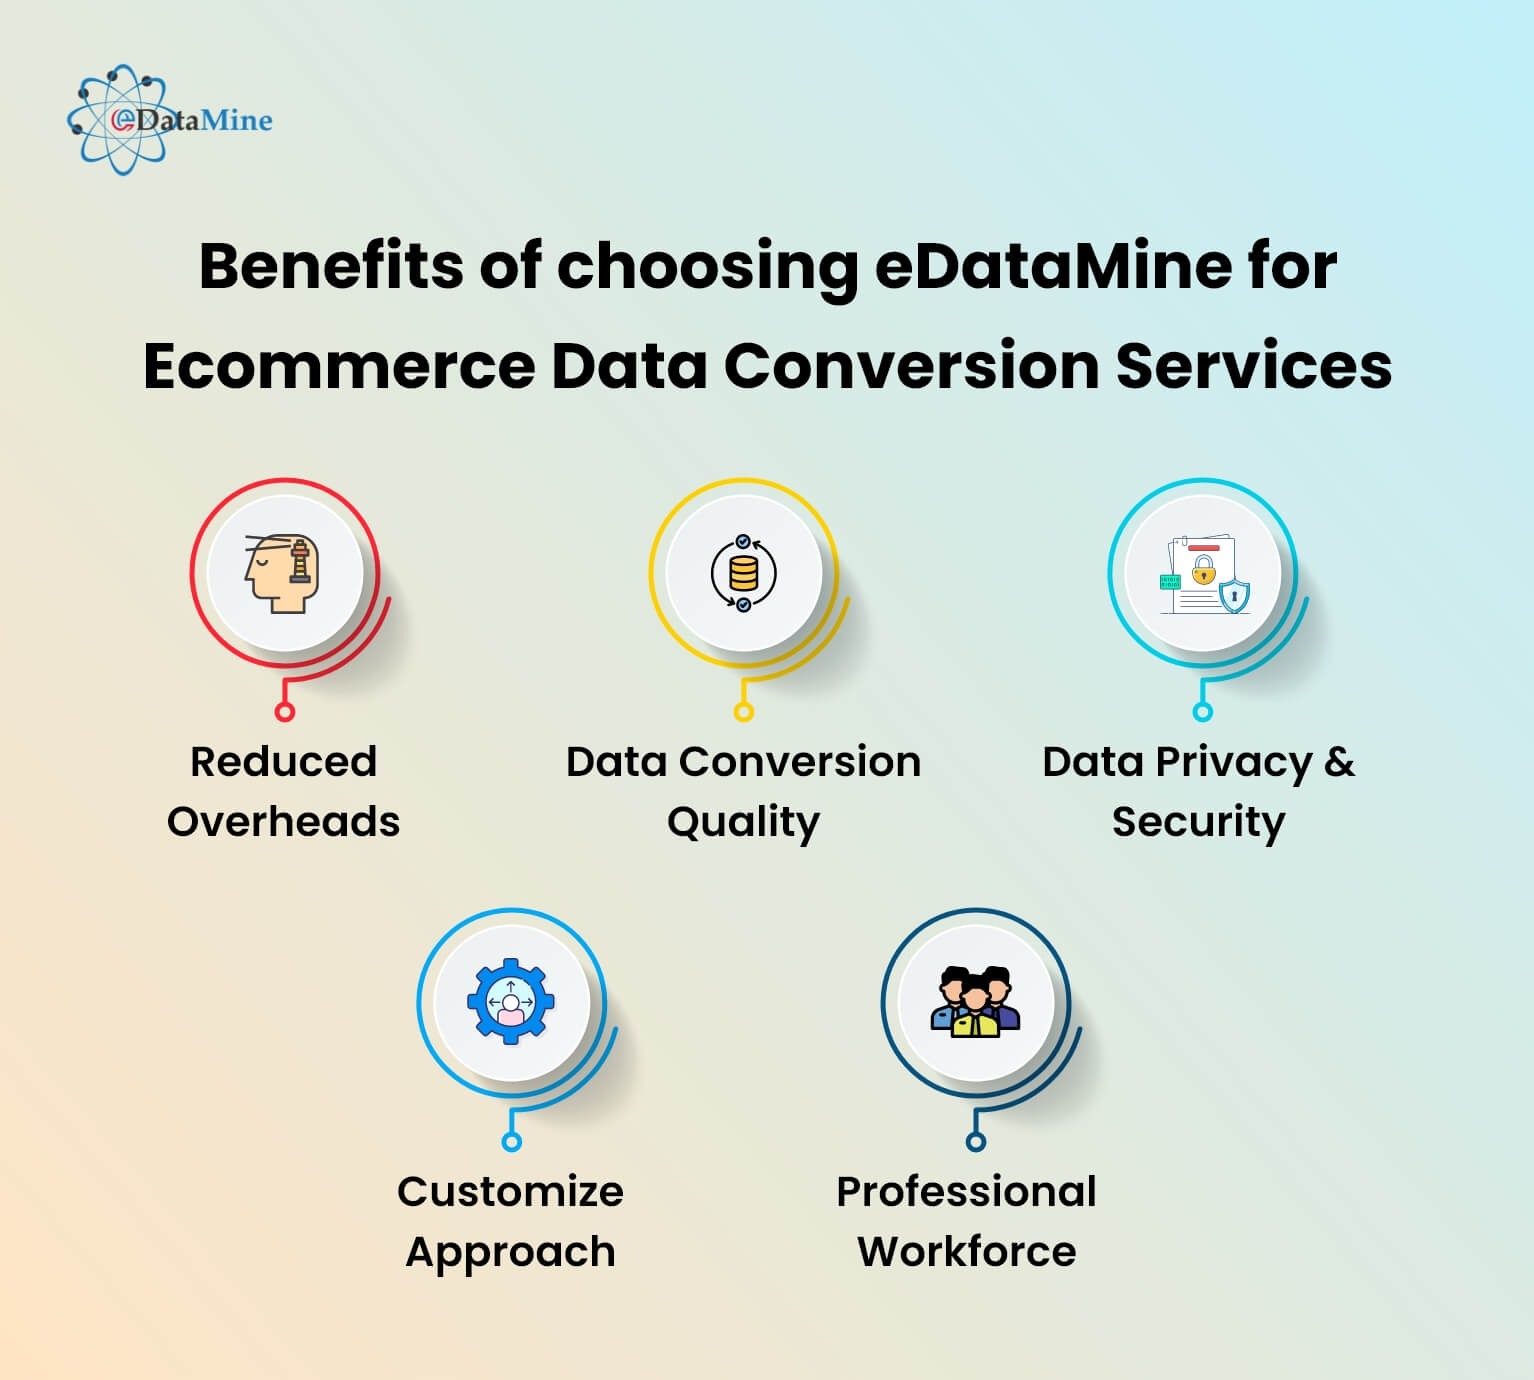 Benefits of choosing eDataMine for Ecommerce Data Conversion Services